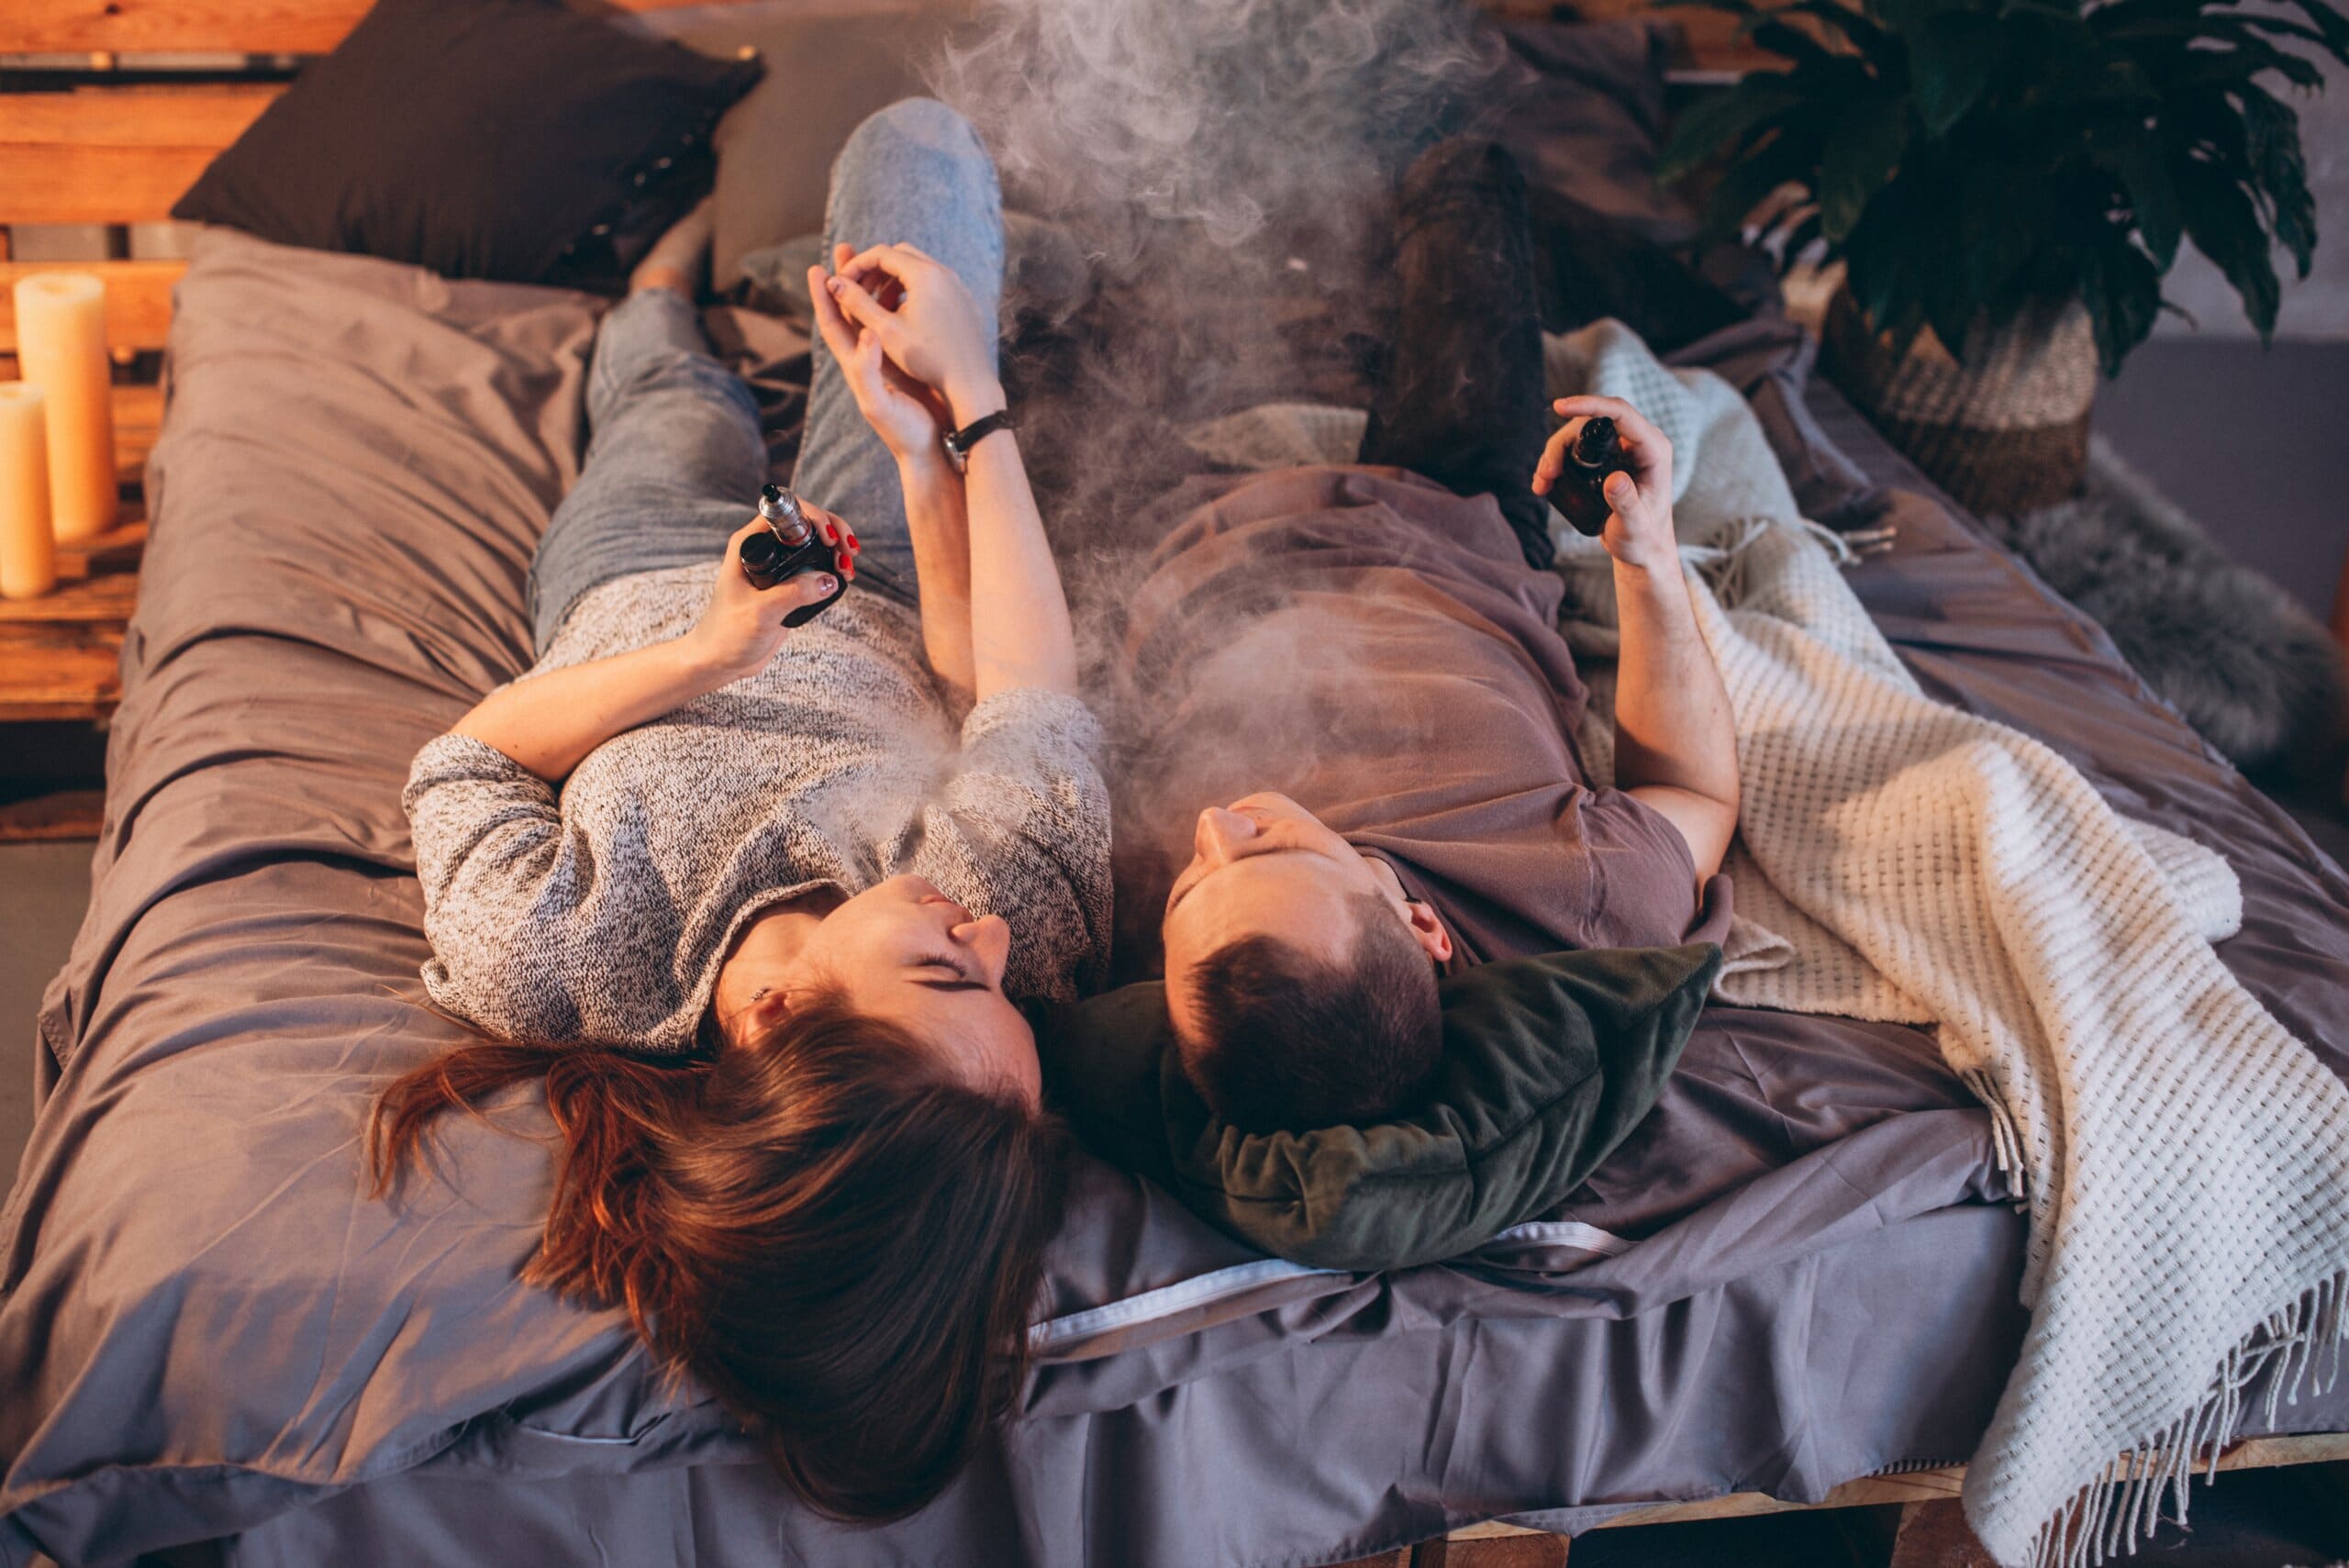 Man and woman smoking vapes in bed.